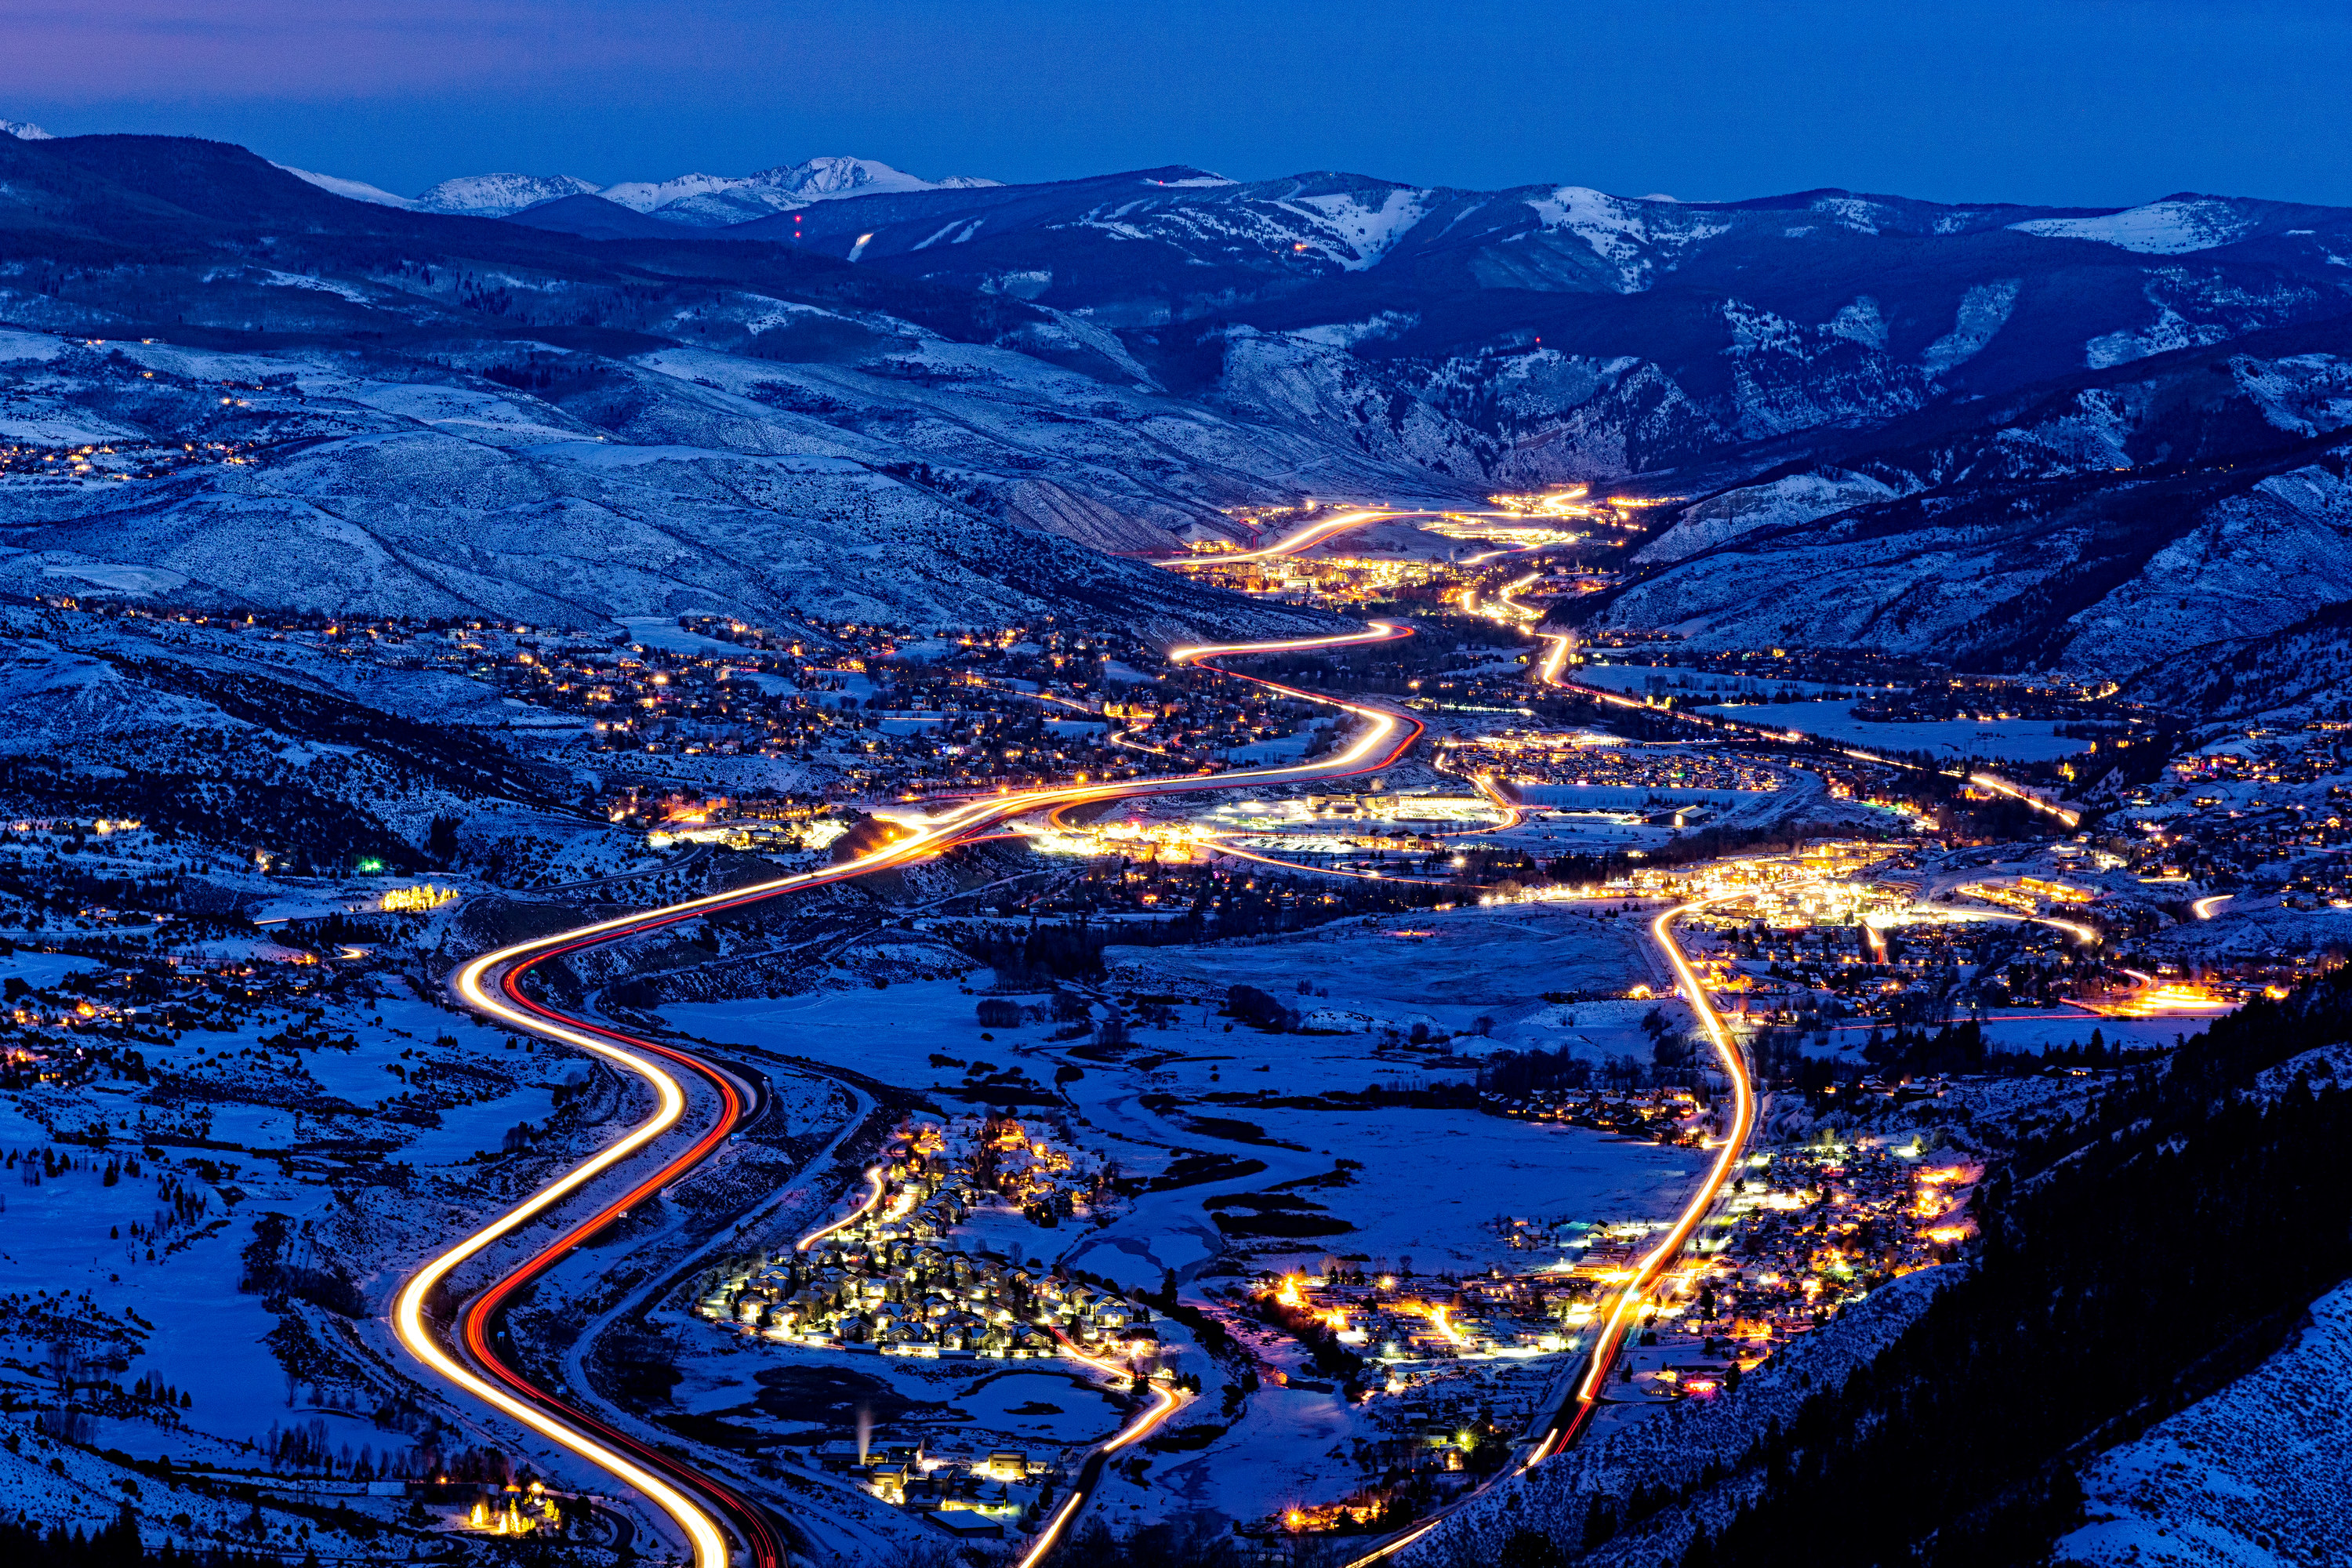 The valley of Vail in the evening